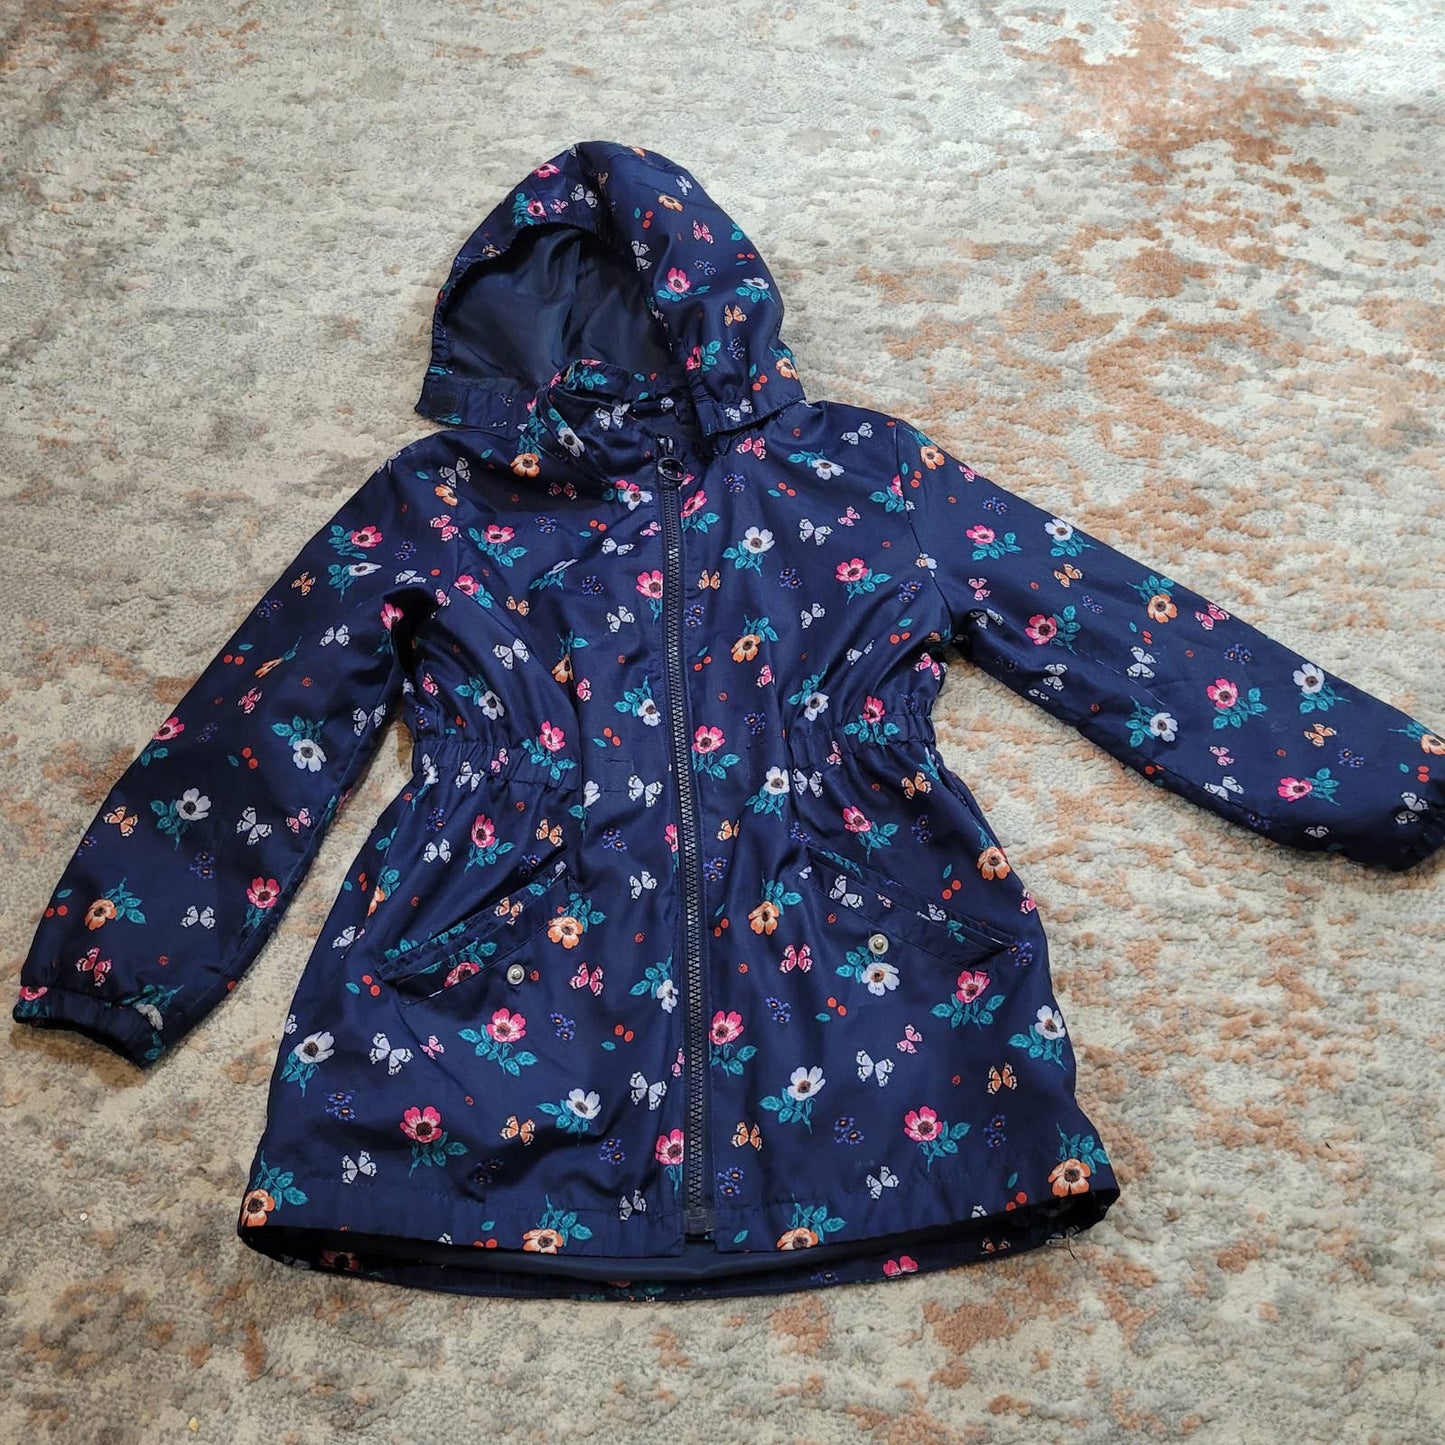 H&M Navy Blue WIndbreaker with Flowers and Butterflys - Size 5-6Y